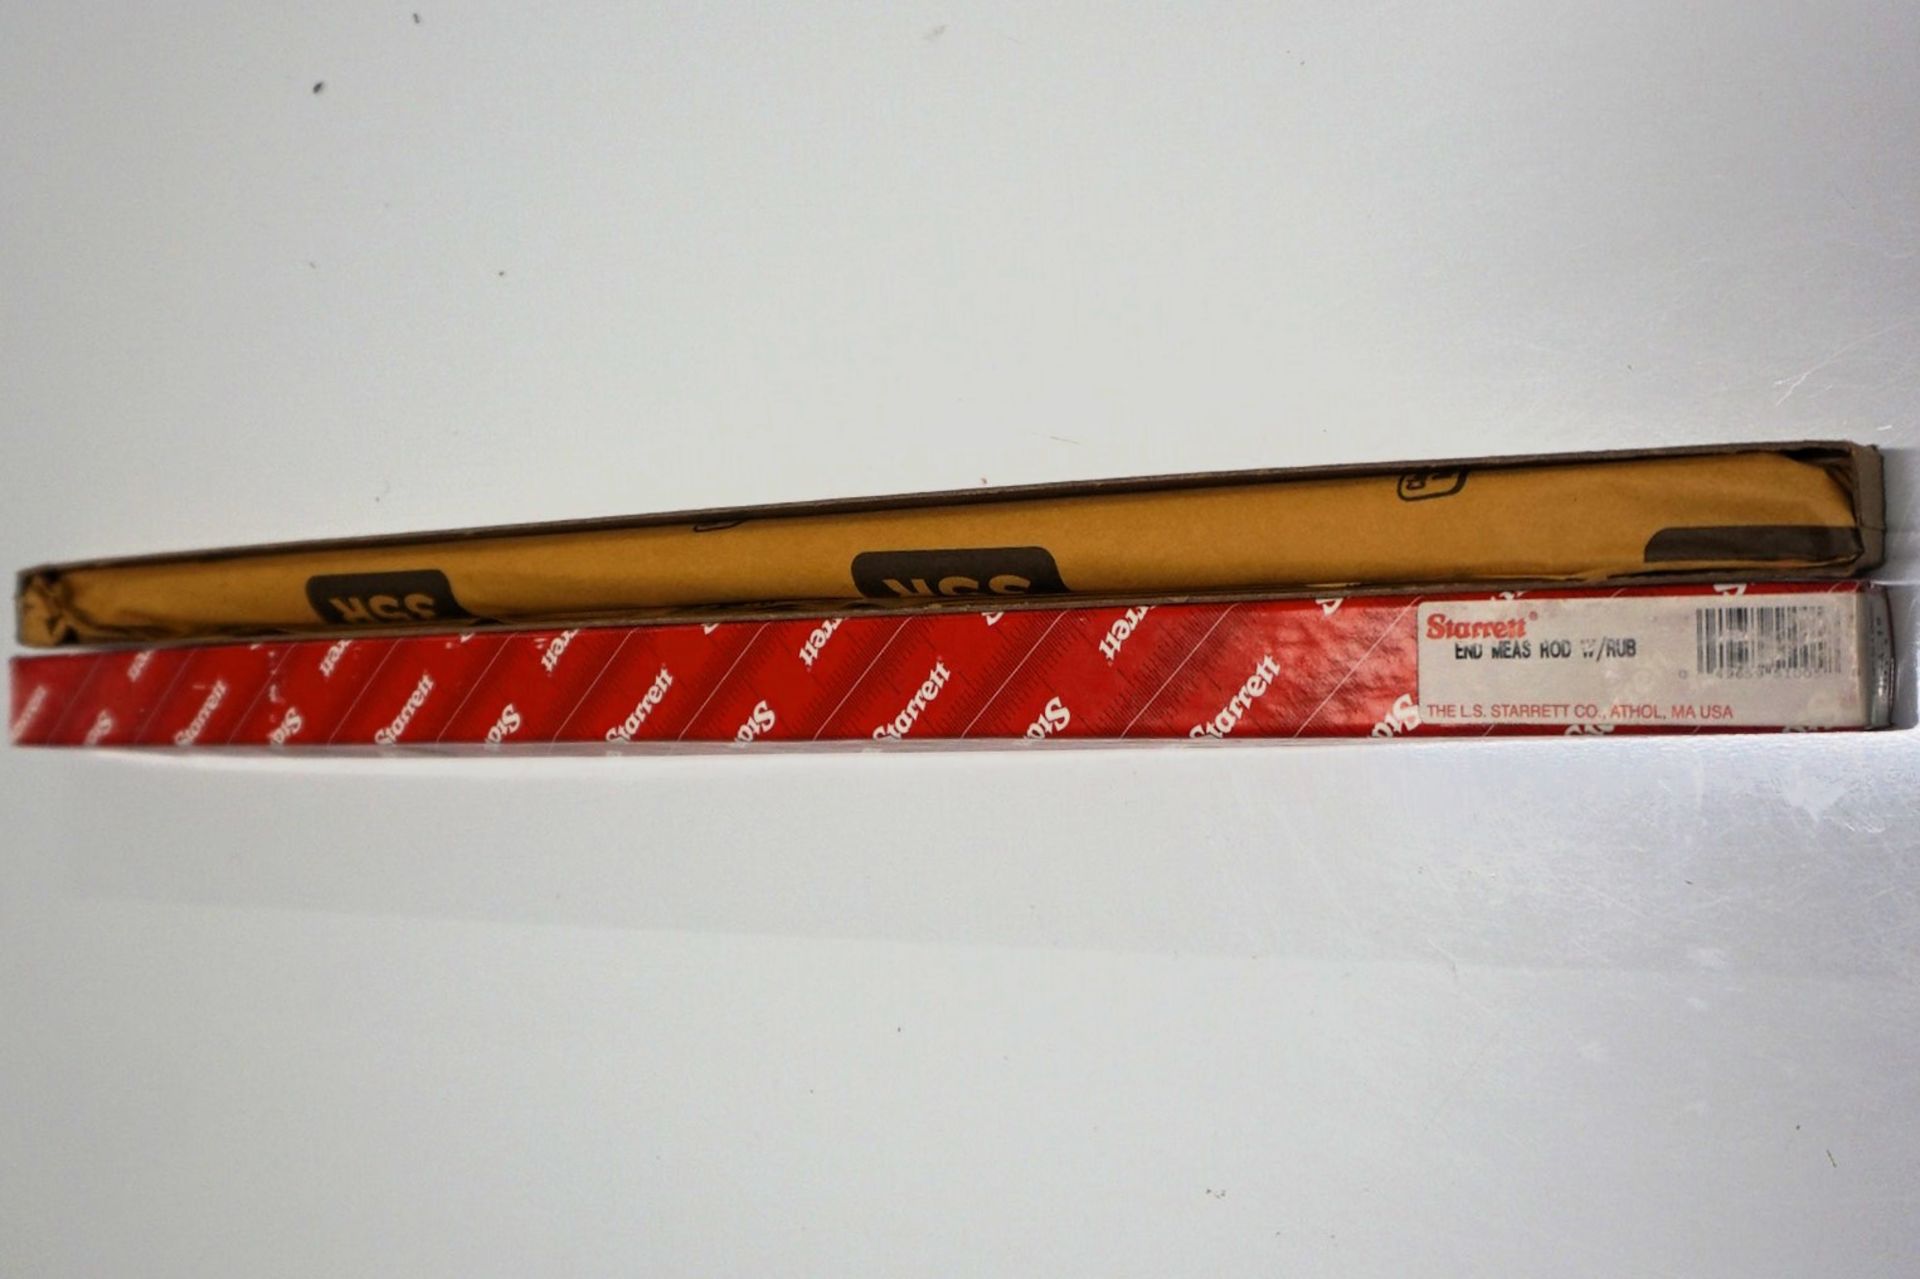 Model No. 234A-19 End Measuring Rod with Insulated Handle and Spherical Ends. 19" Length.